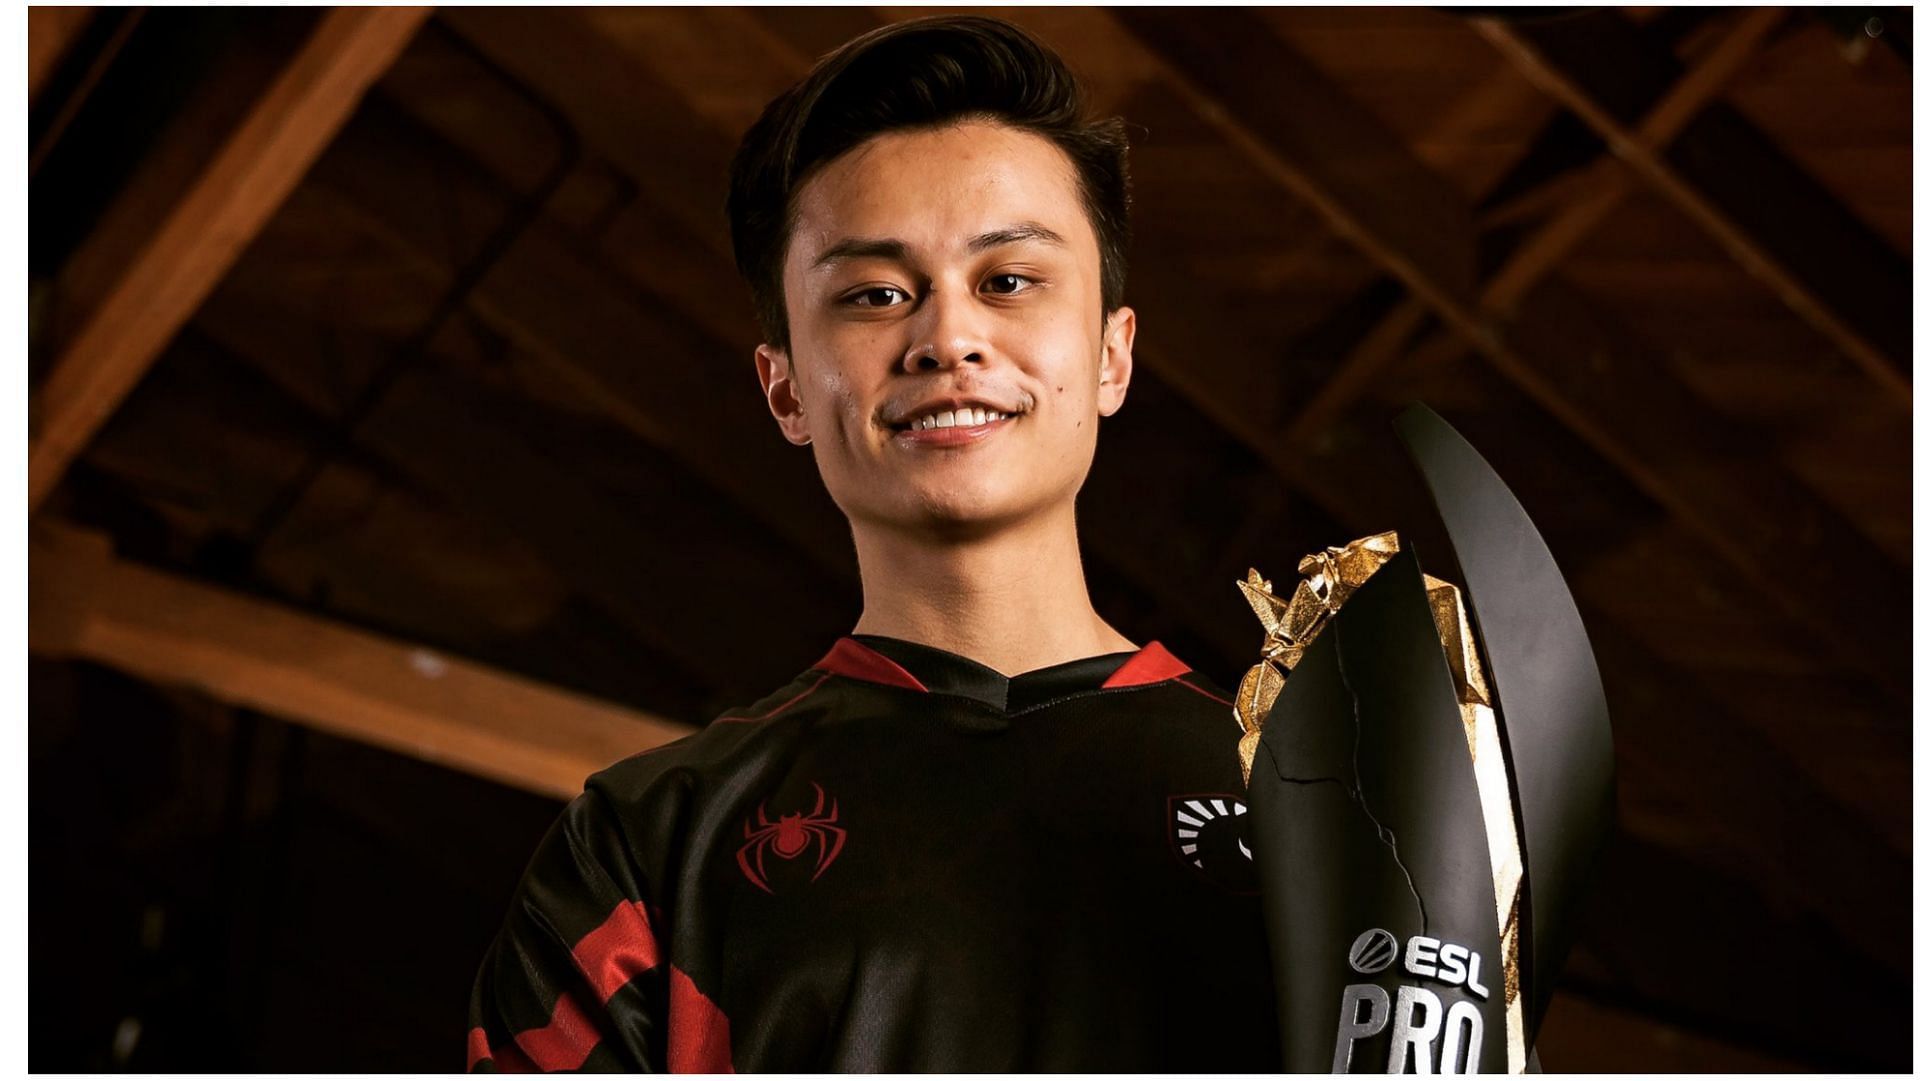 Stewie2K confirms his intentions of moving from CS:GO to Valorant (Image via Twitter)